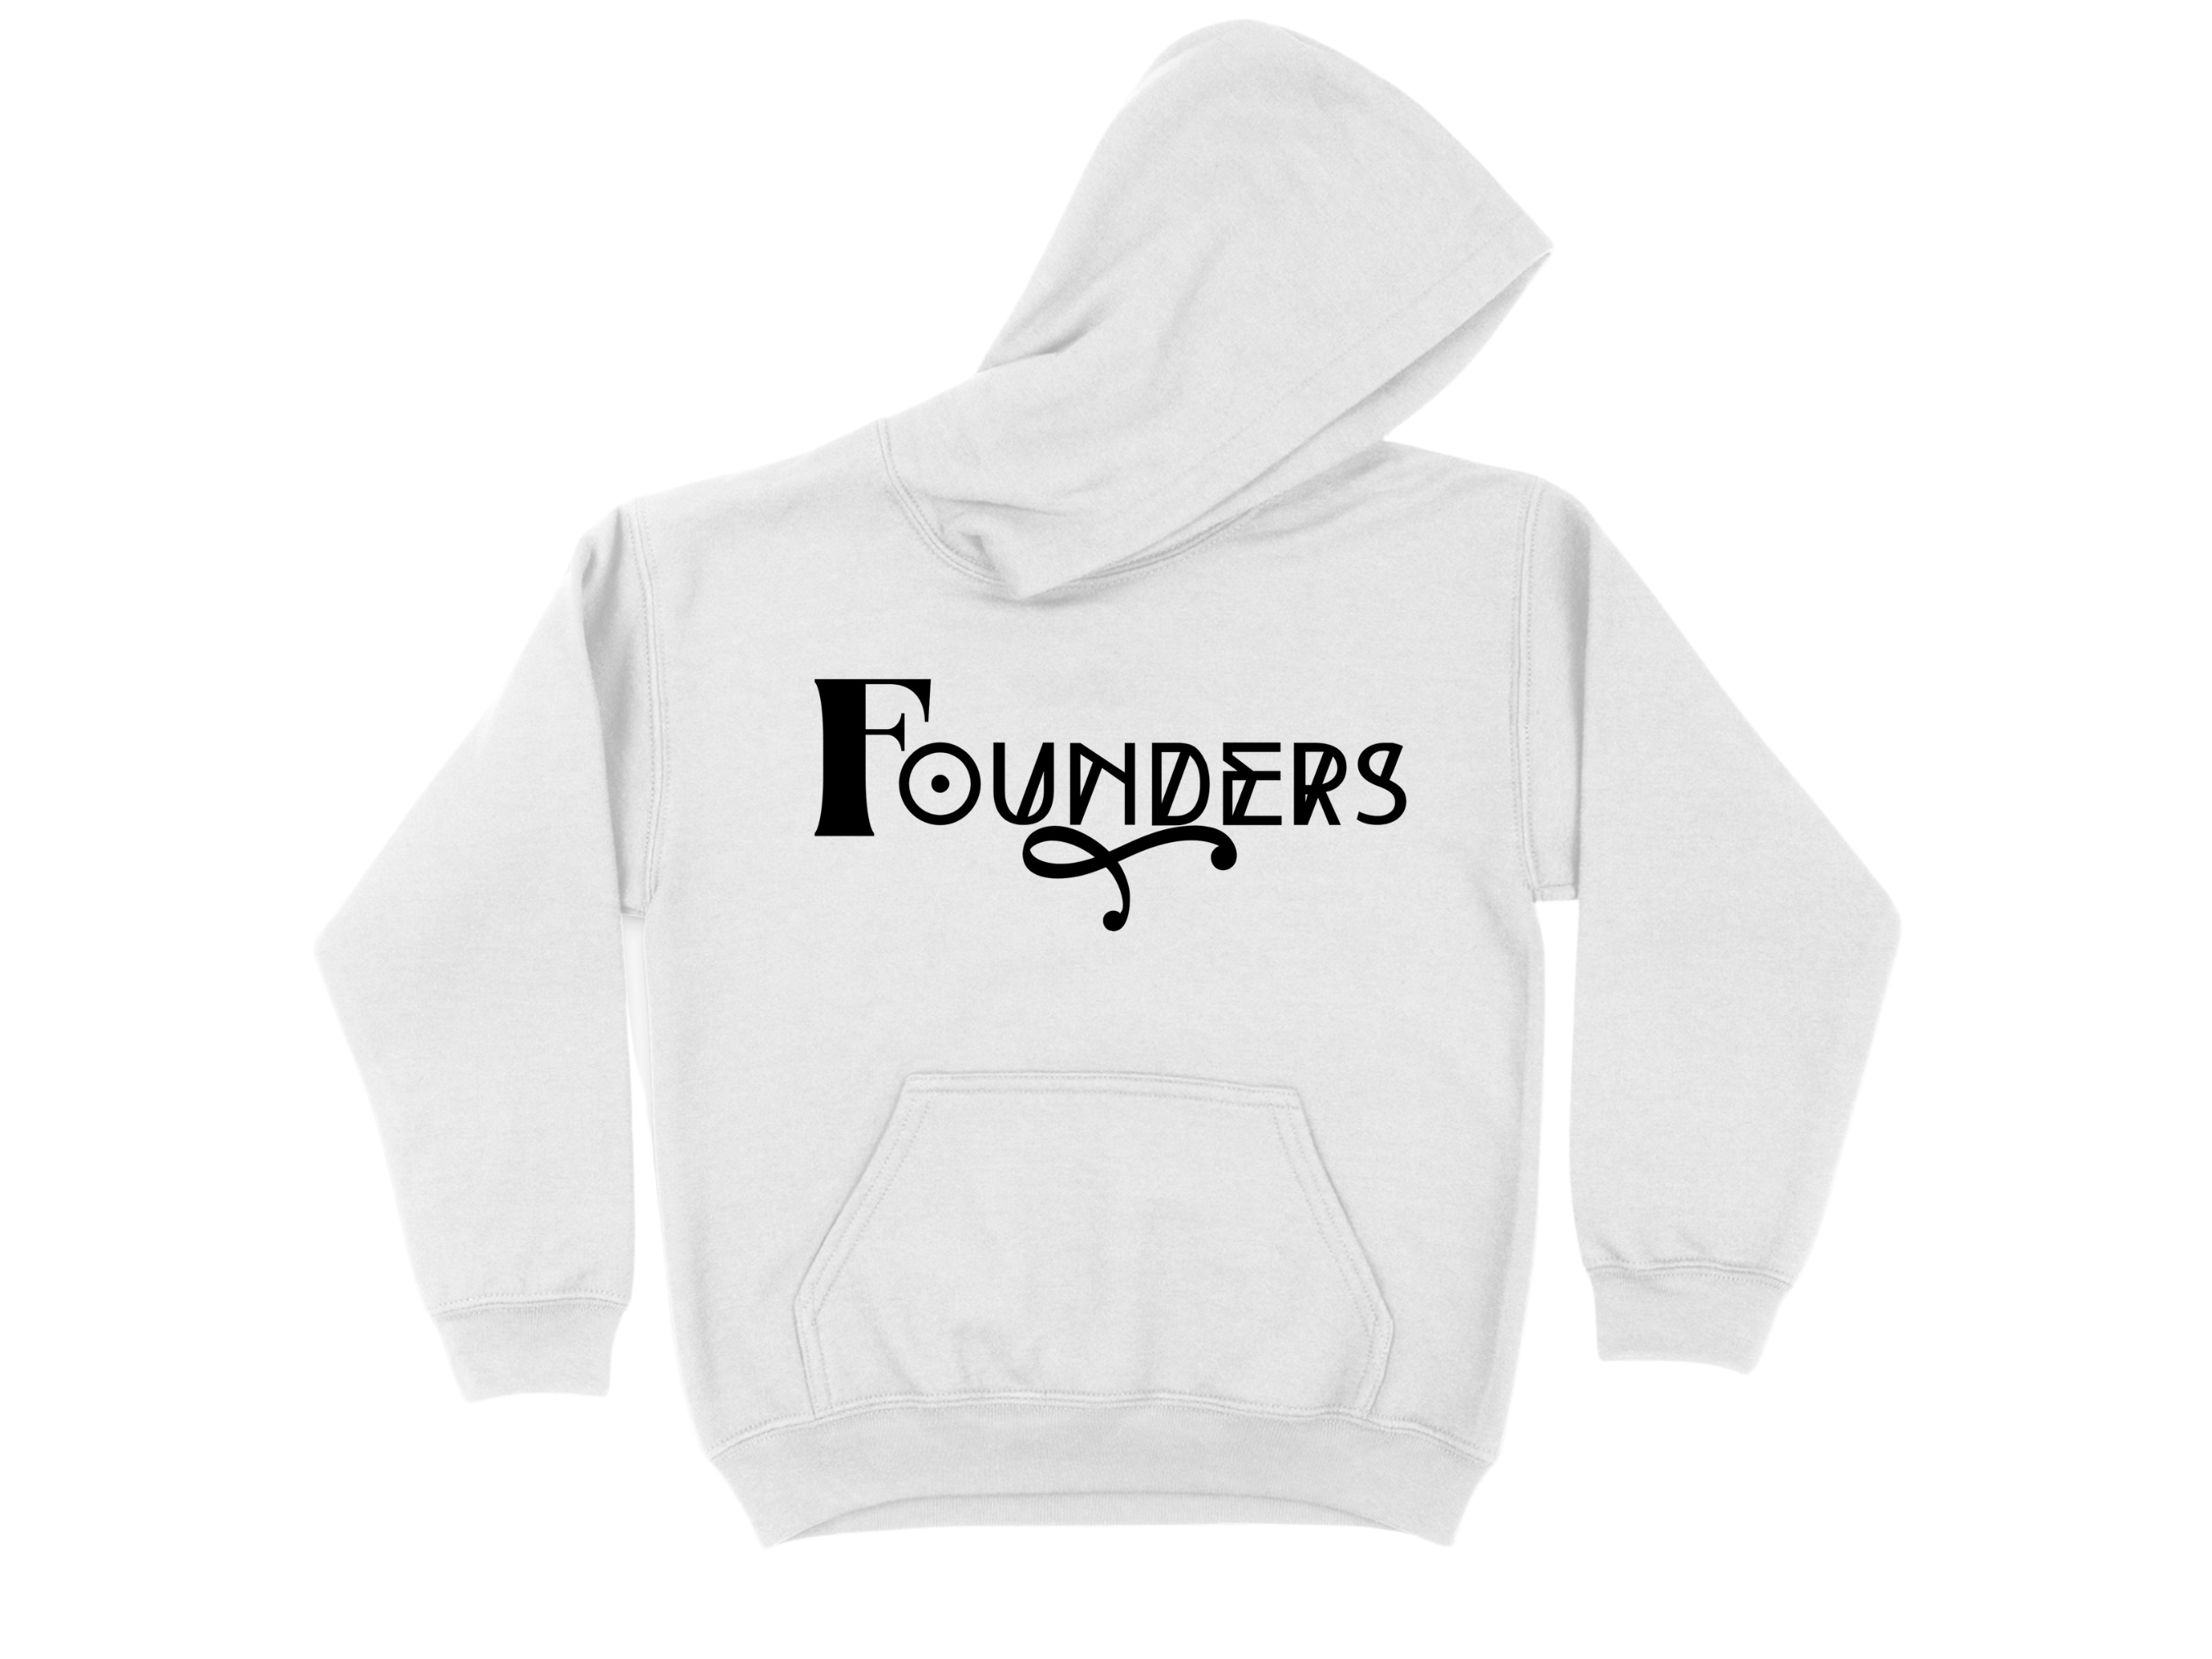 Founders ~ White Hoodie  Large Image